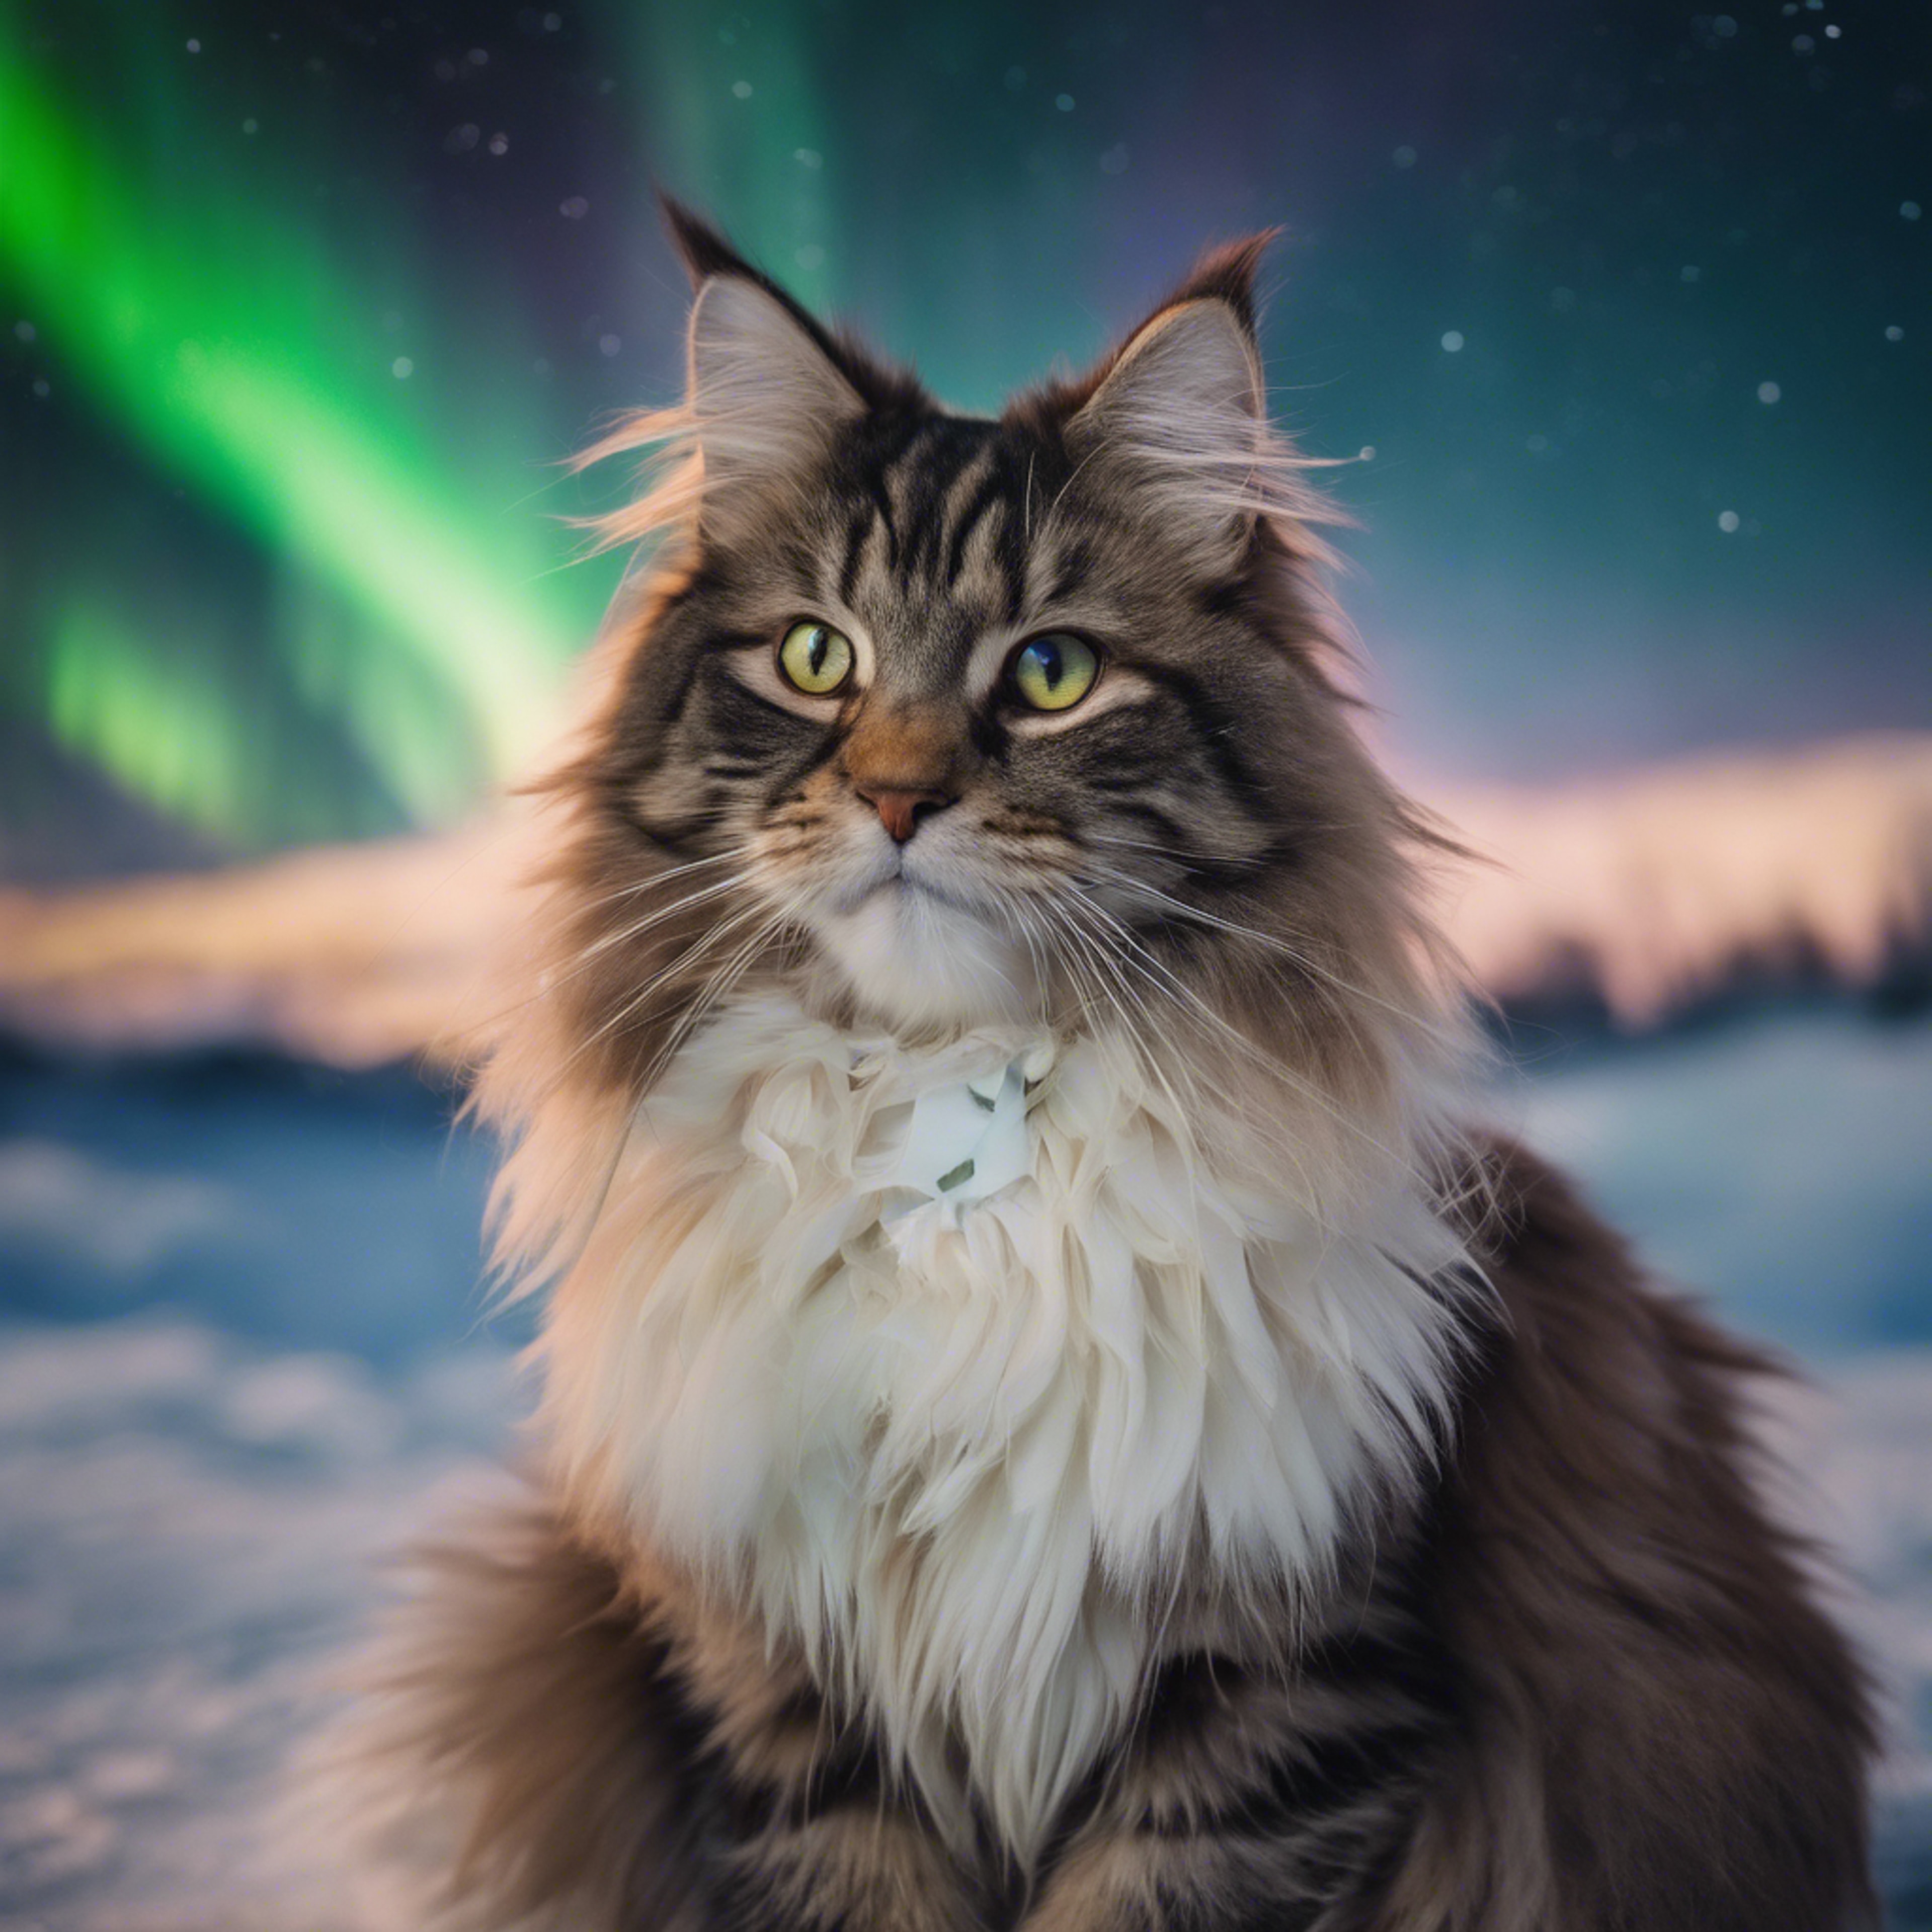 A Norwegian Forest cat sitting quietly under the aurora borealis, its eyes reflecting the dancing lights. Tapetai[1b2a9174317e40c9a8f4]